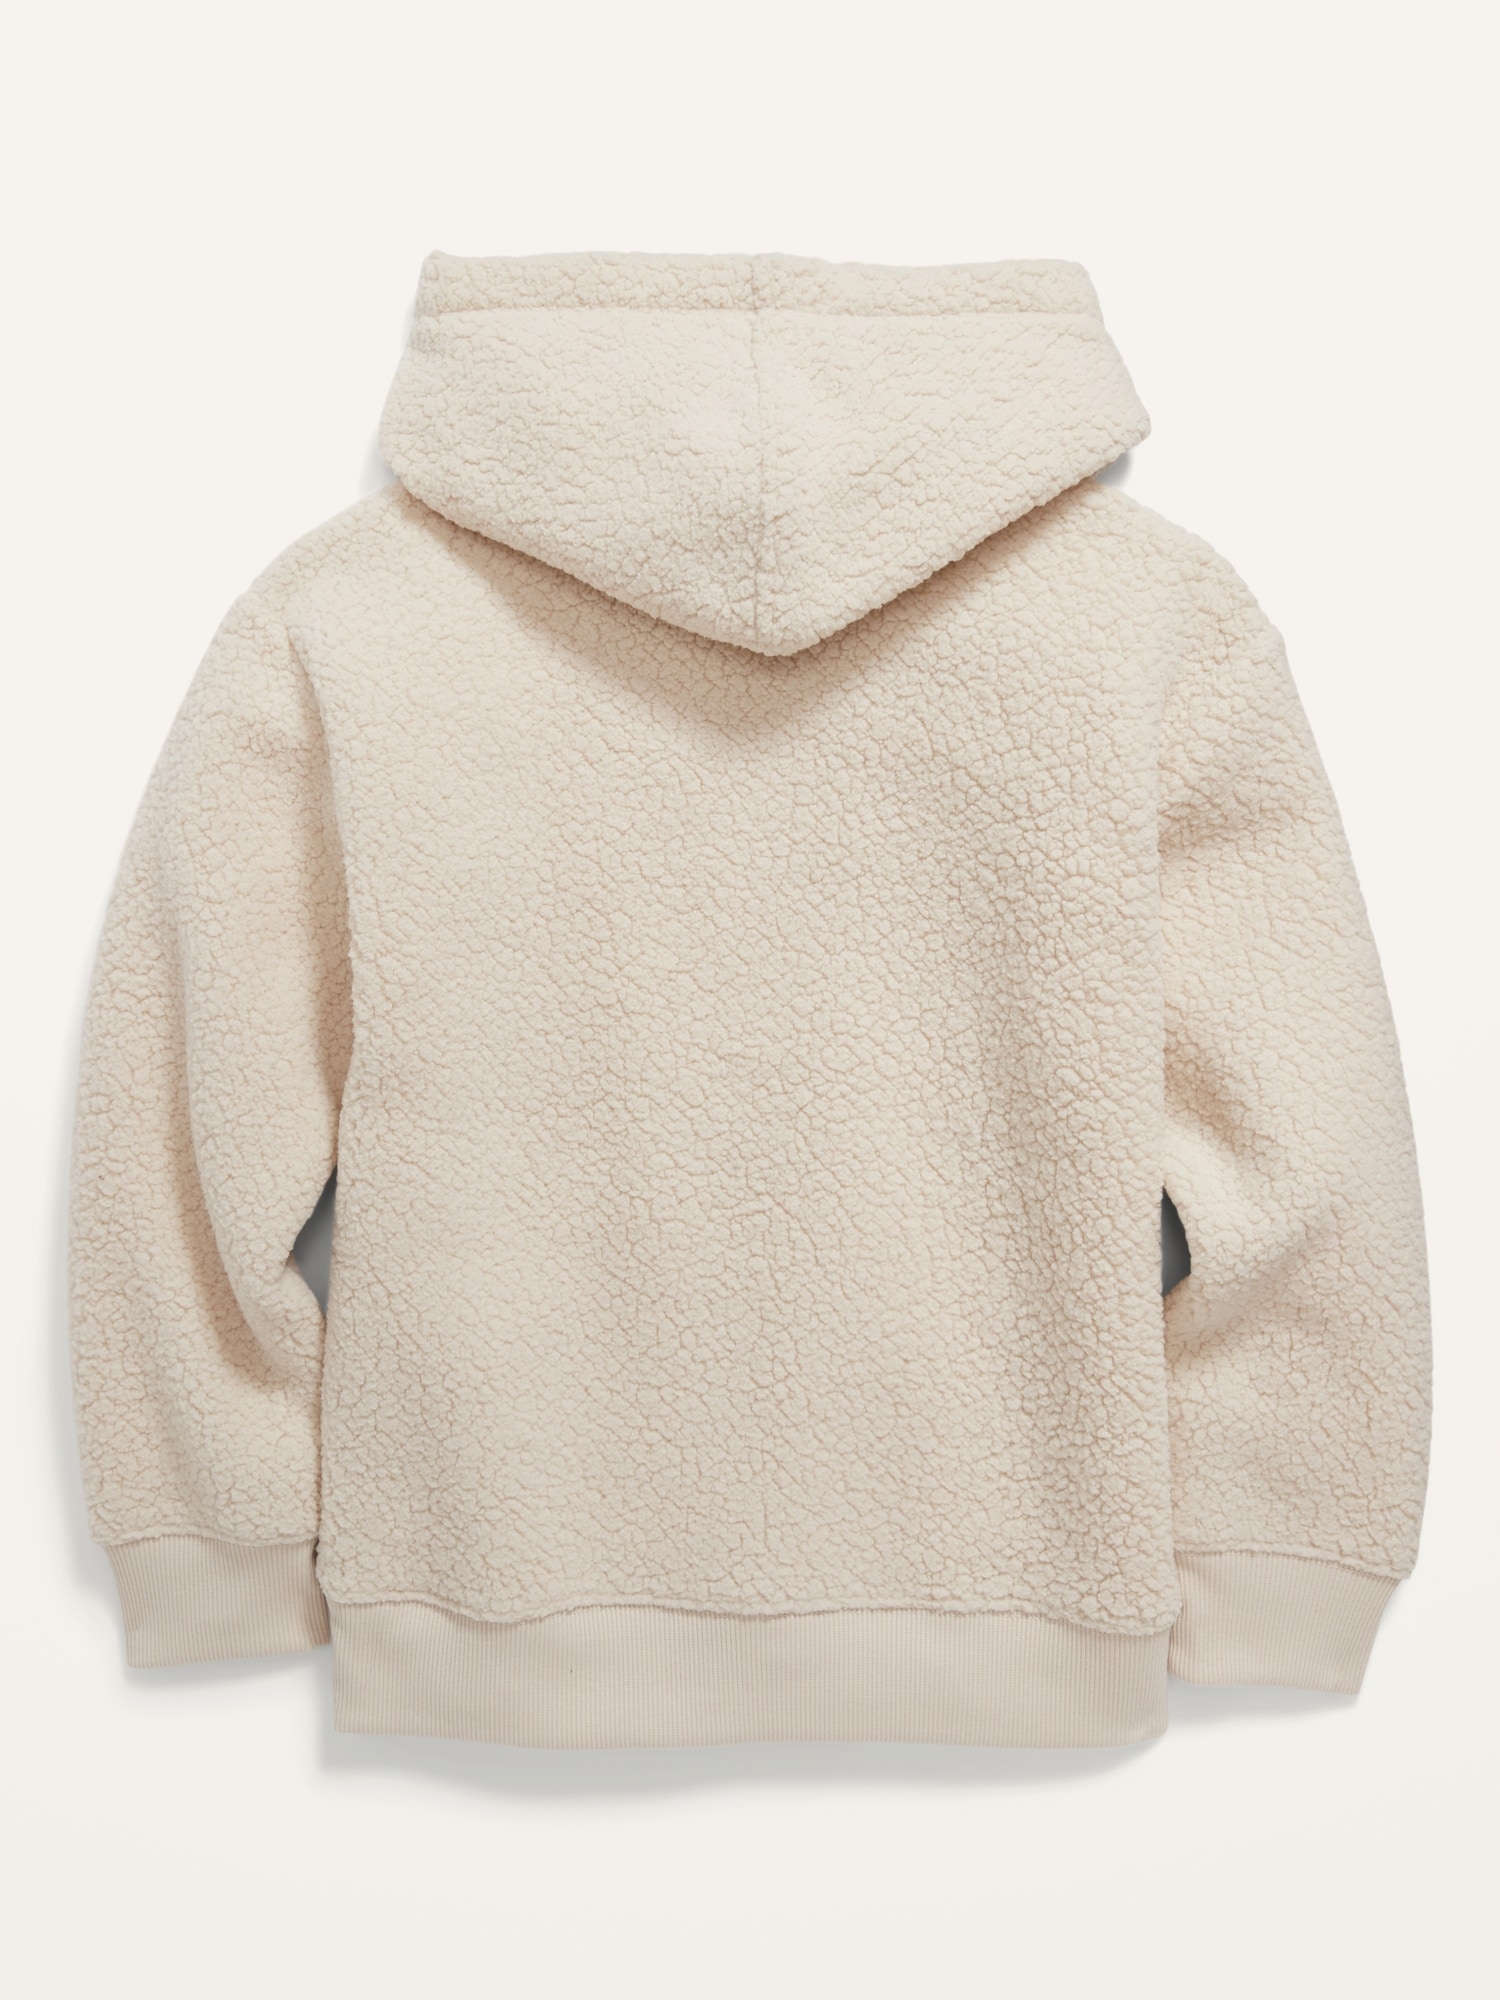 Oversized Sherpa Pullover Hoodie For Boys | Old Navy